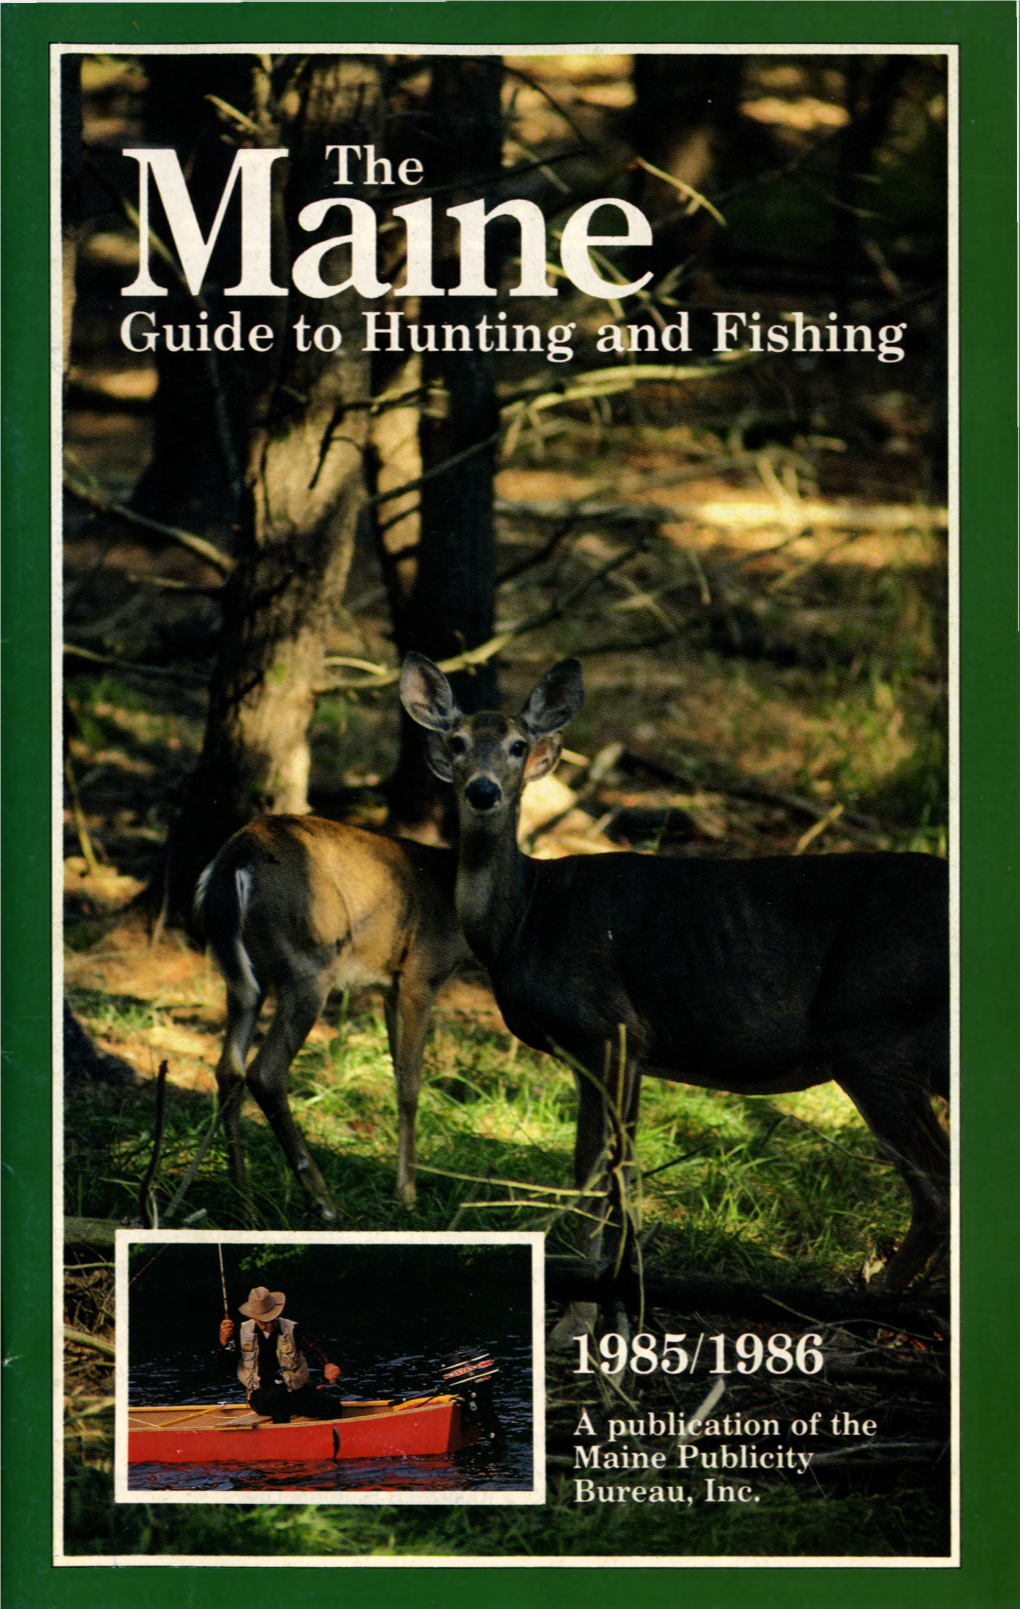 The Maine Guide to Hunting and Fishing